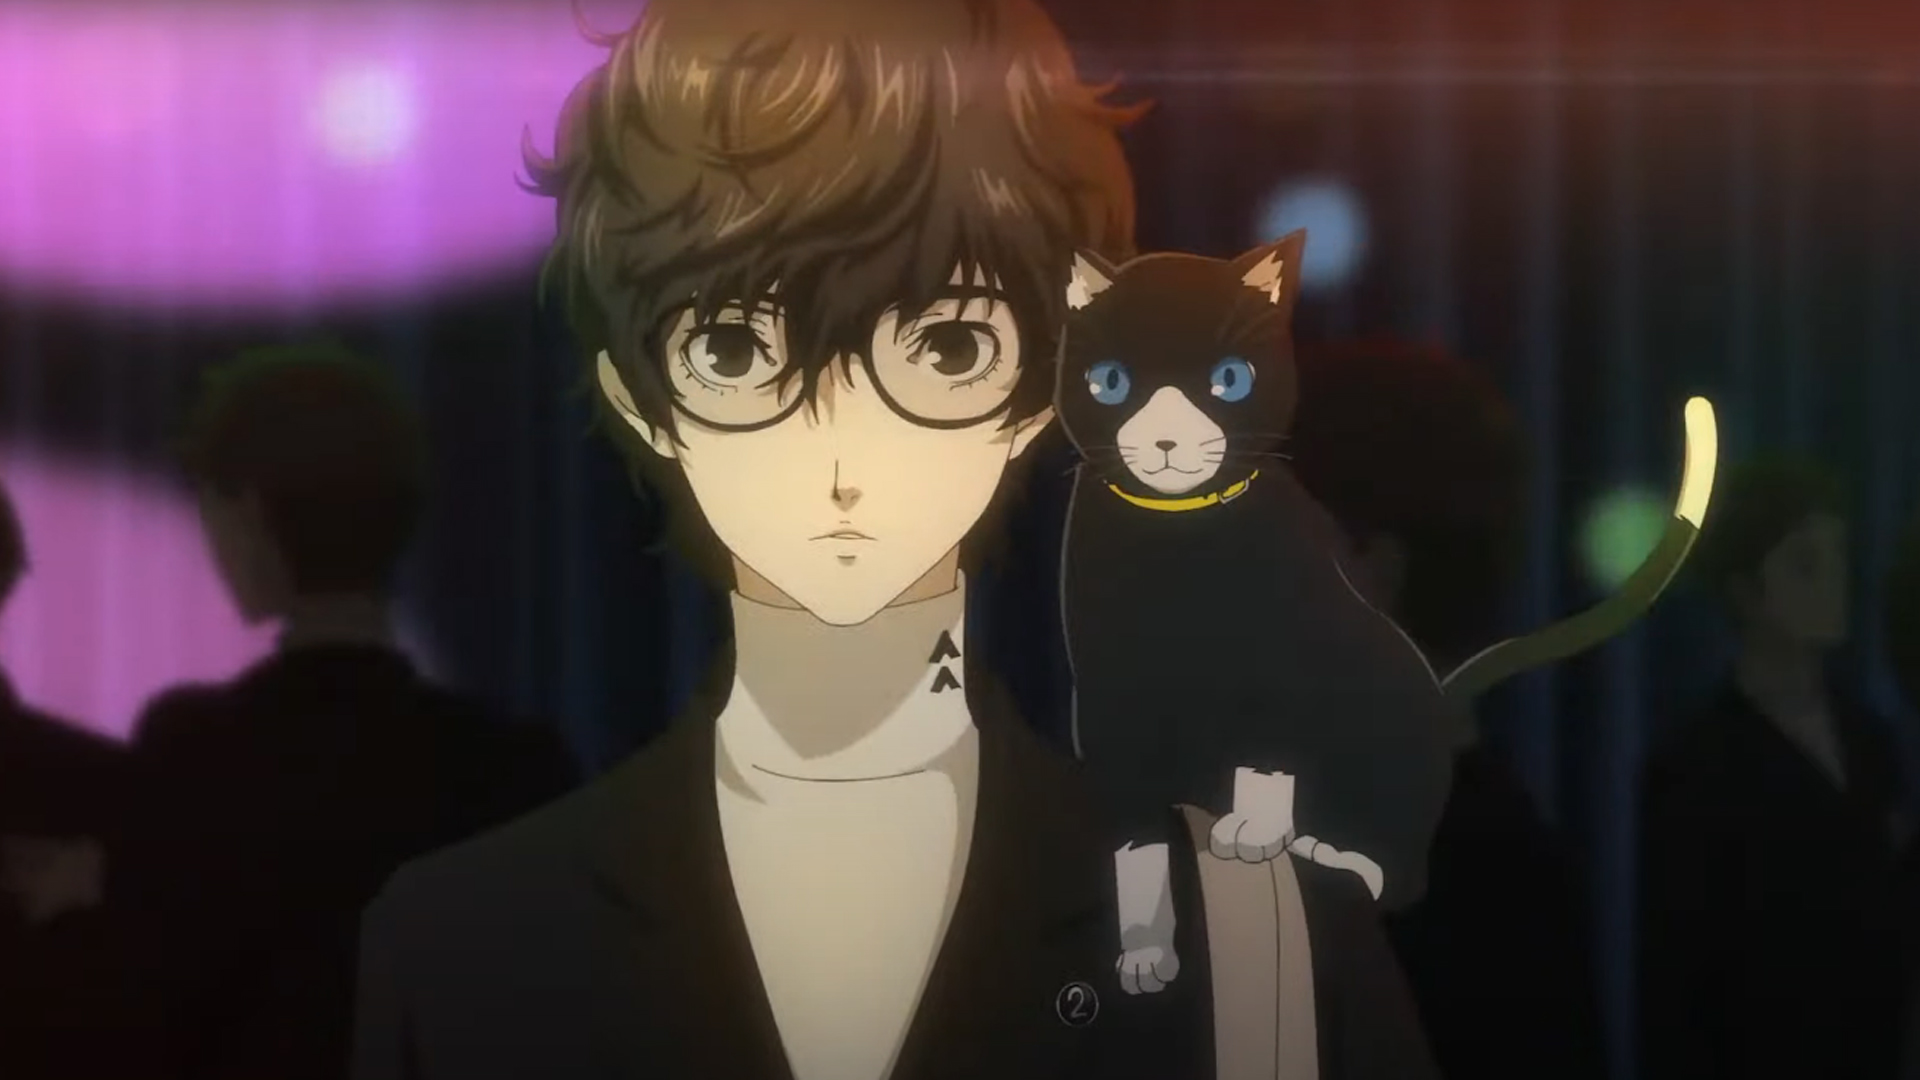 Persona 5 PC is coming October, and on Game Pass too